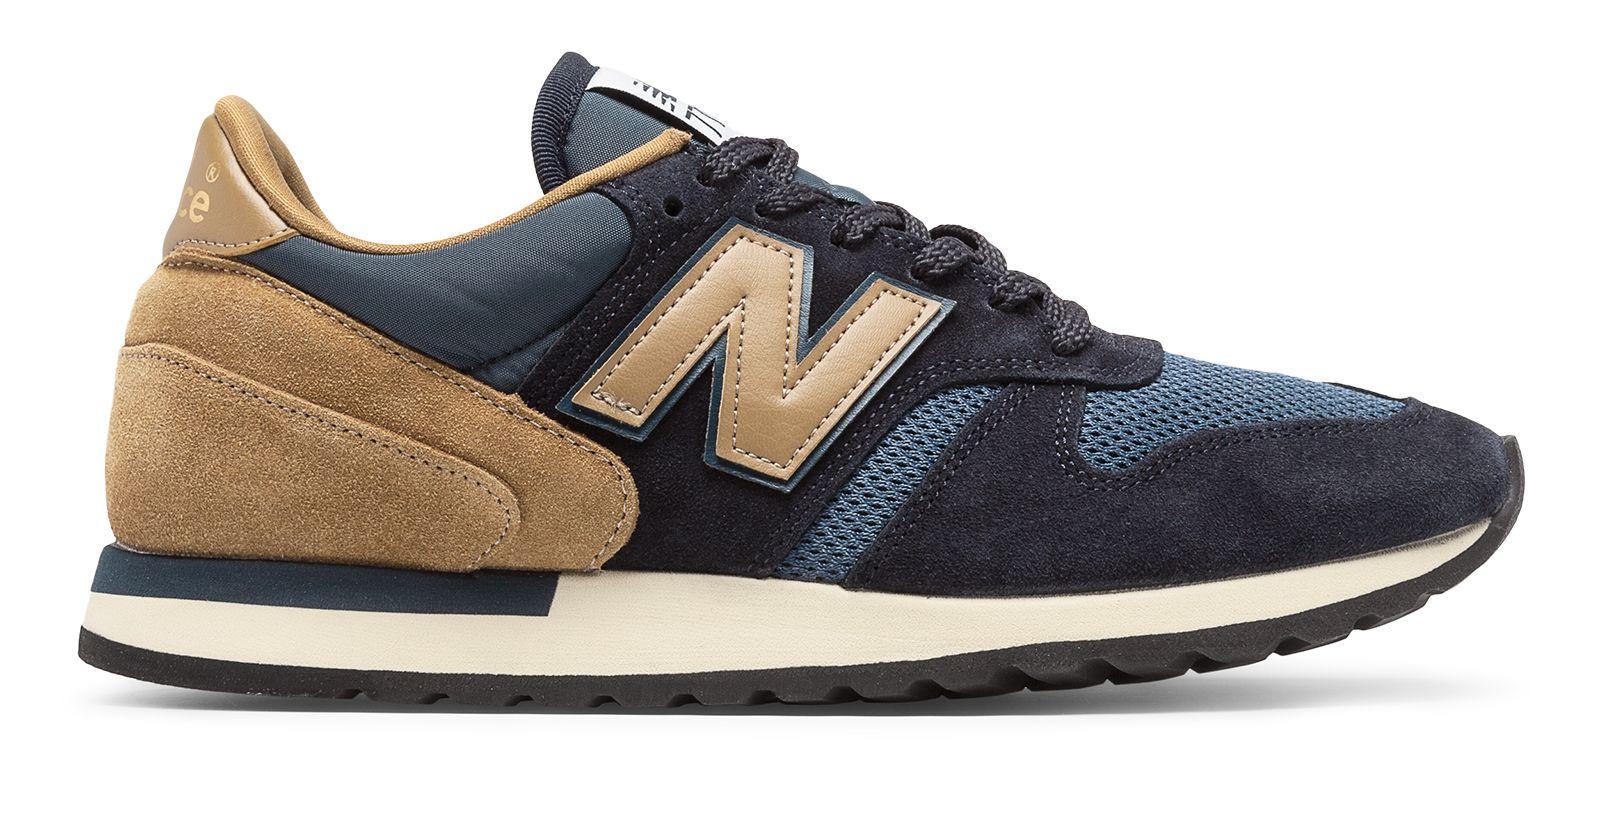 New Balance 770 Made In Uk Suede in Blue for Men - Lyst